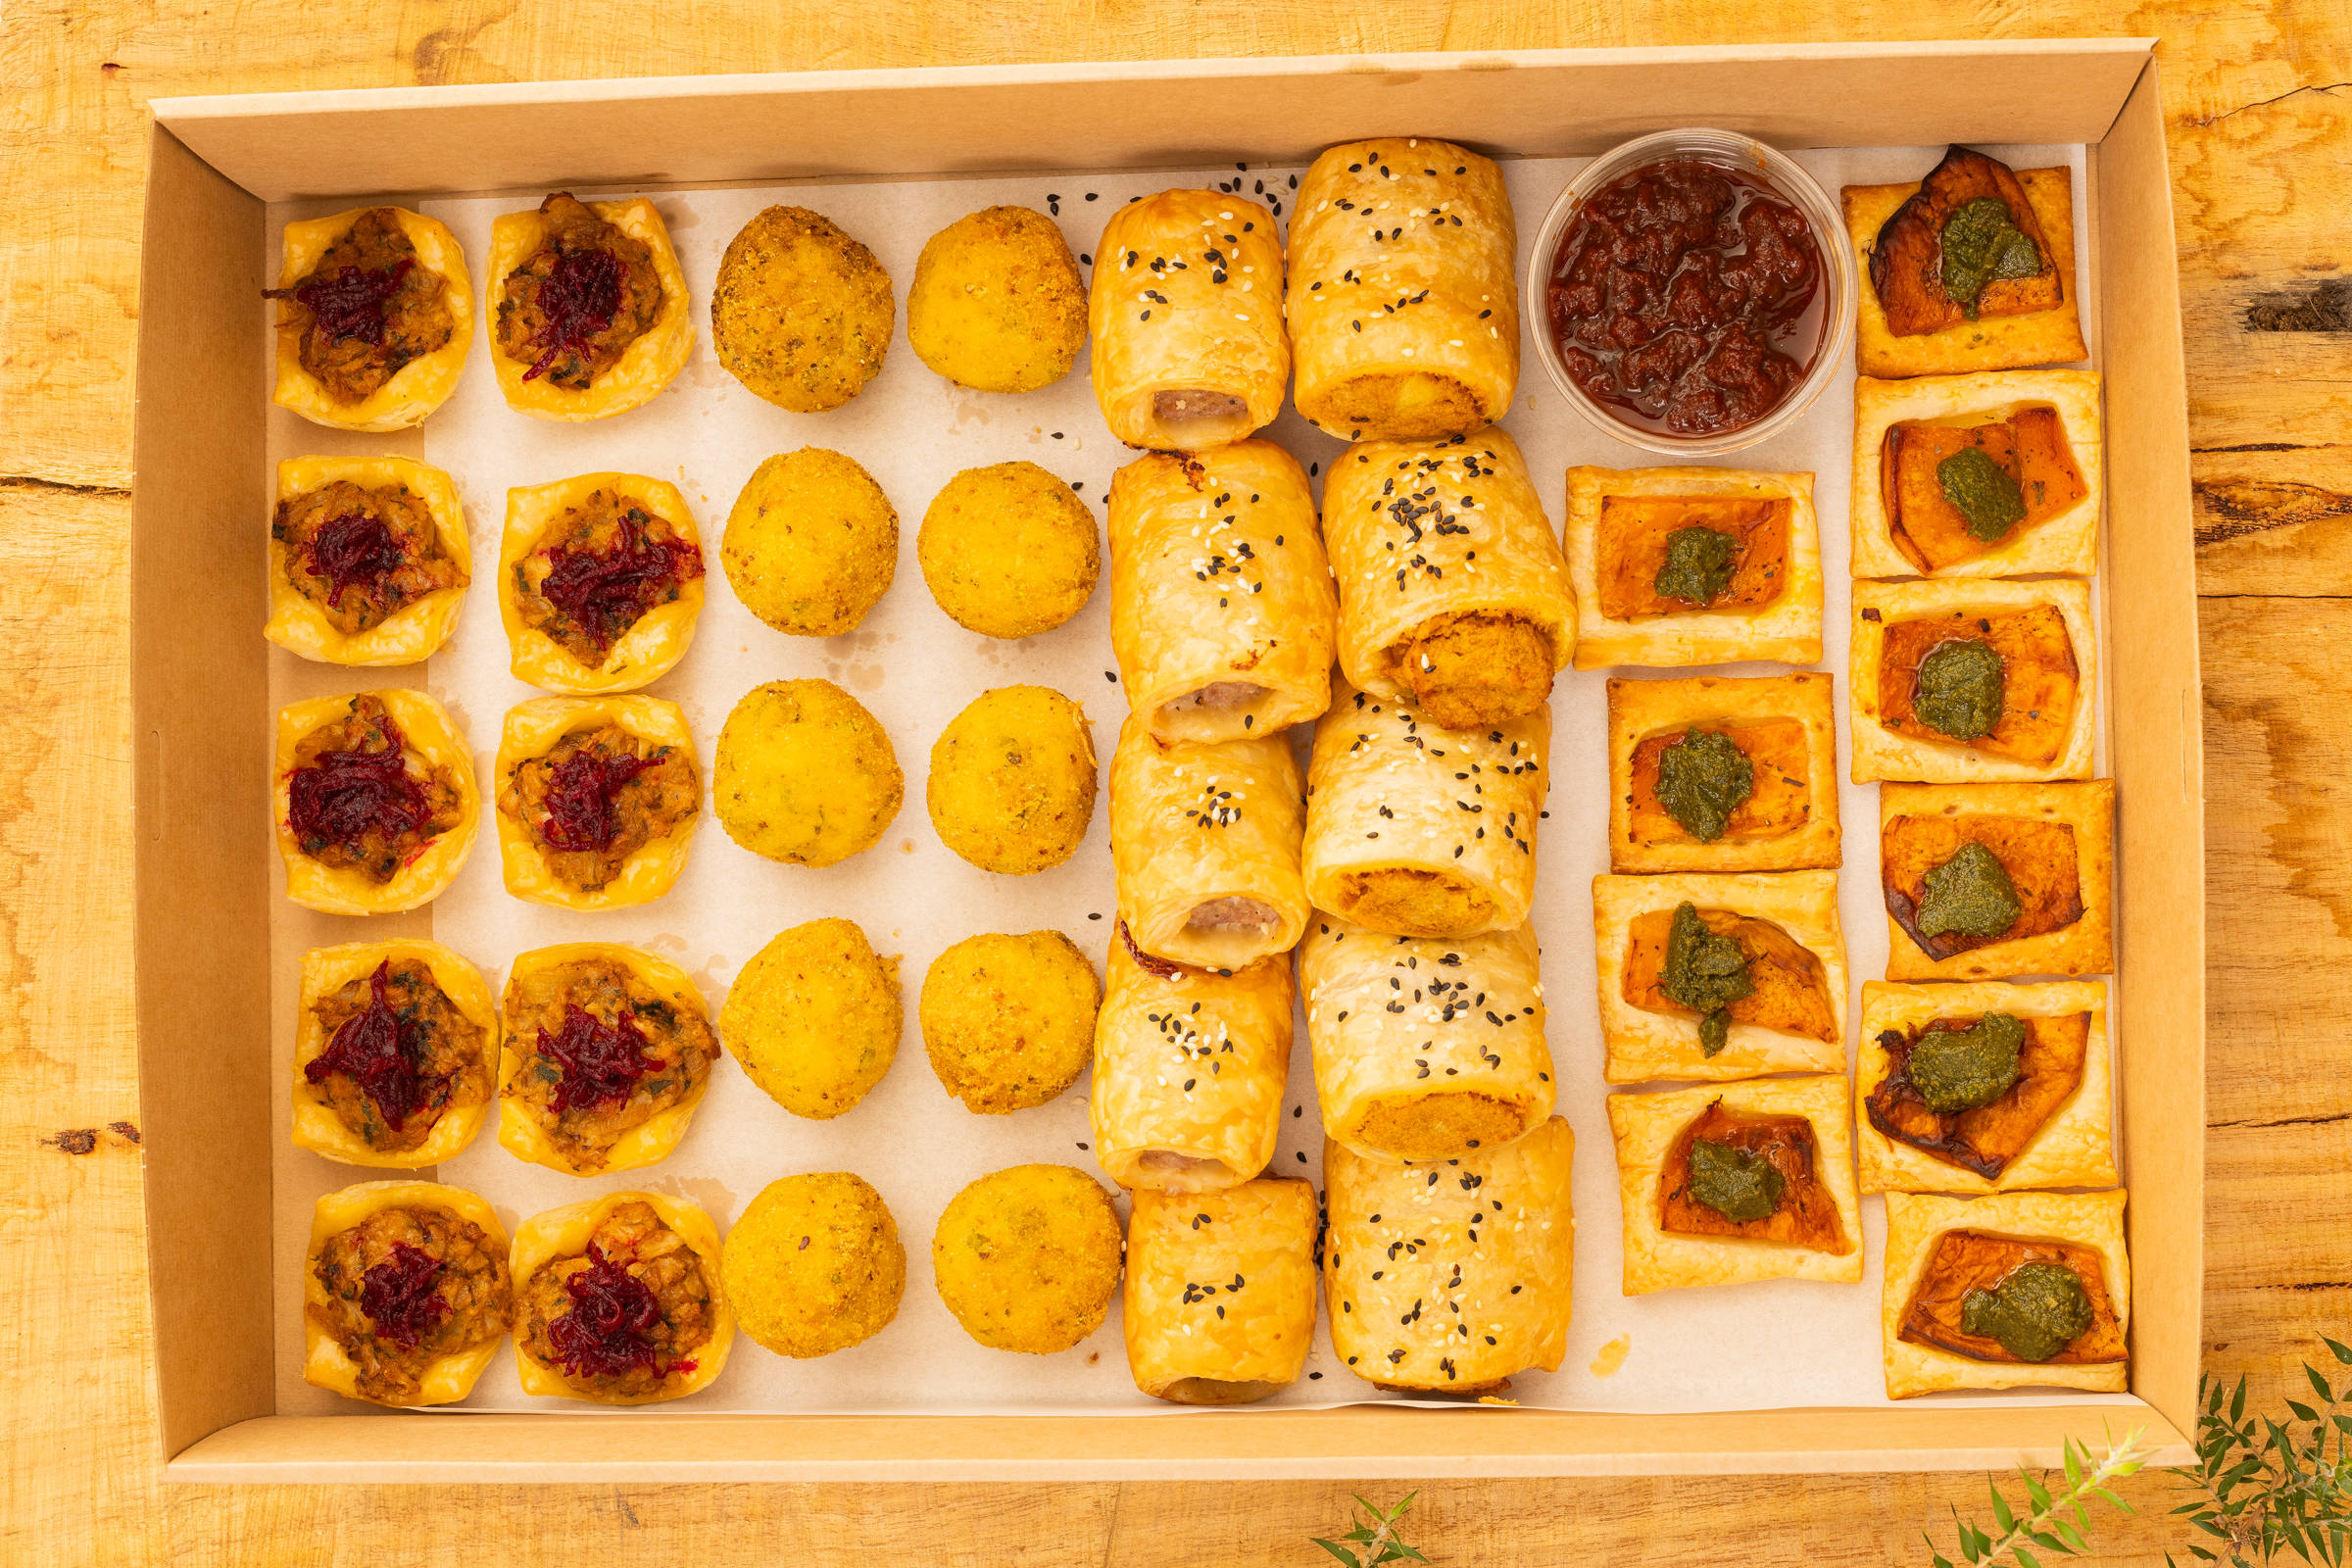 Hot gluten-free and vegan selection box containing 40 items, including savoury rolls, pea and basil arancini, pumpkin galette with salsa verde, and cauliflower pie. Credit: Richard Jupe.